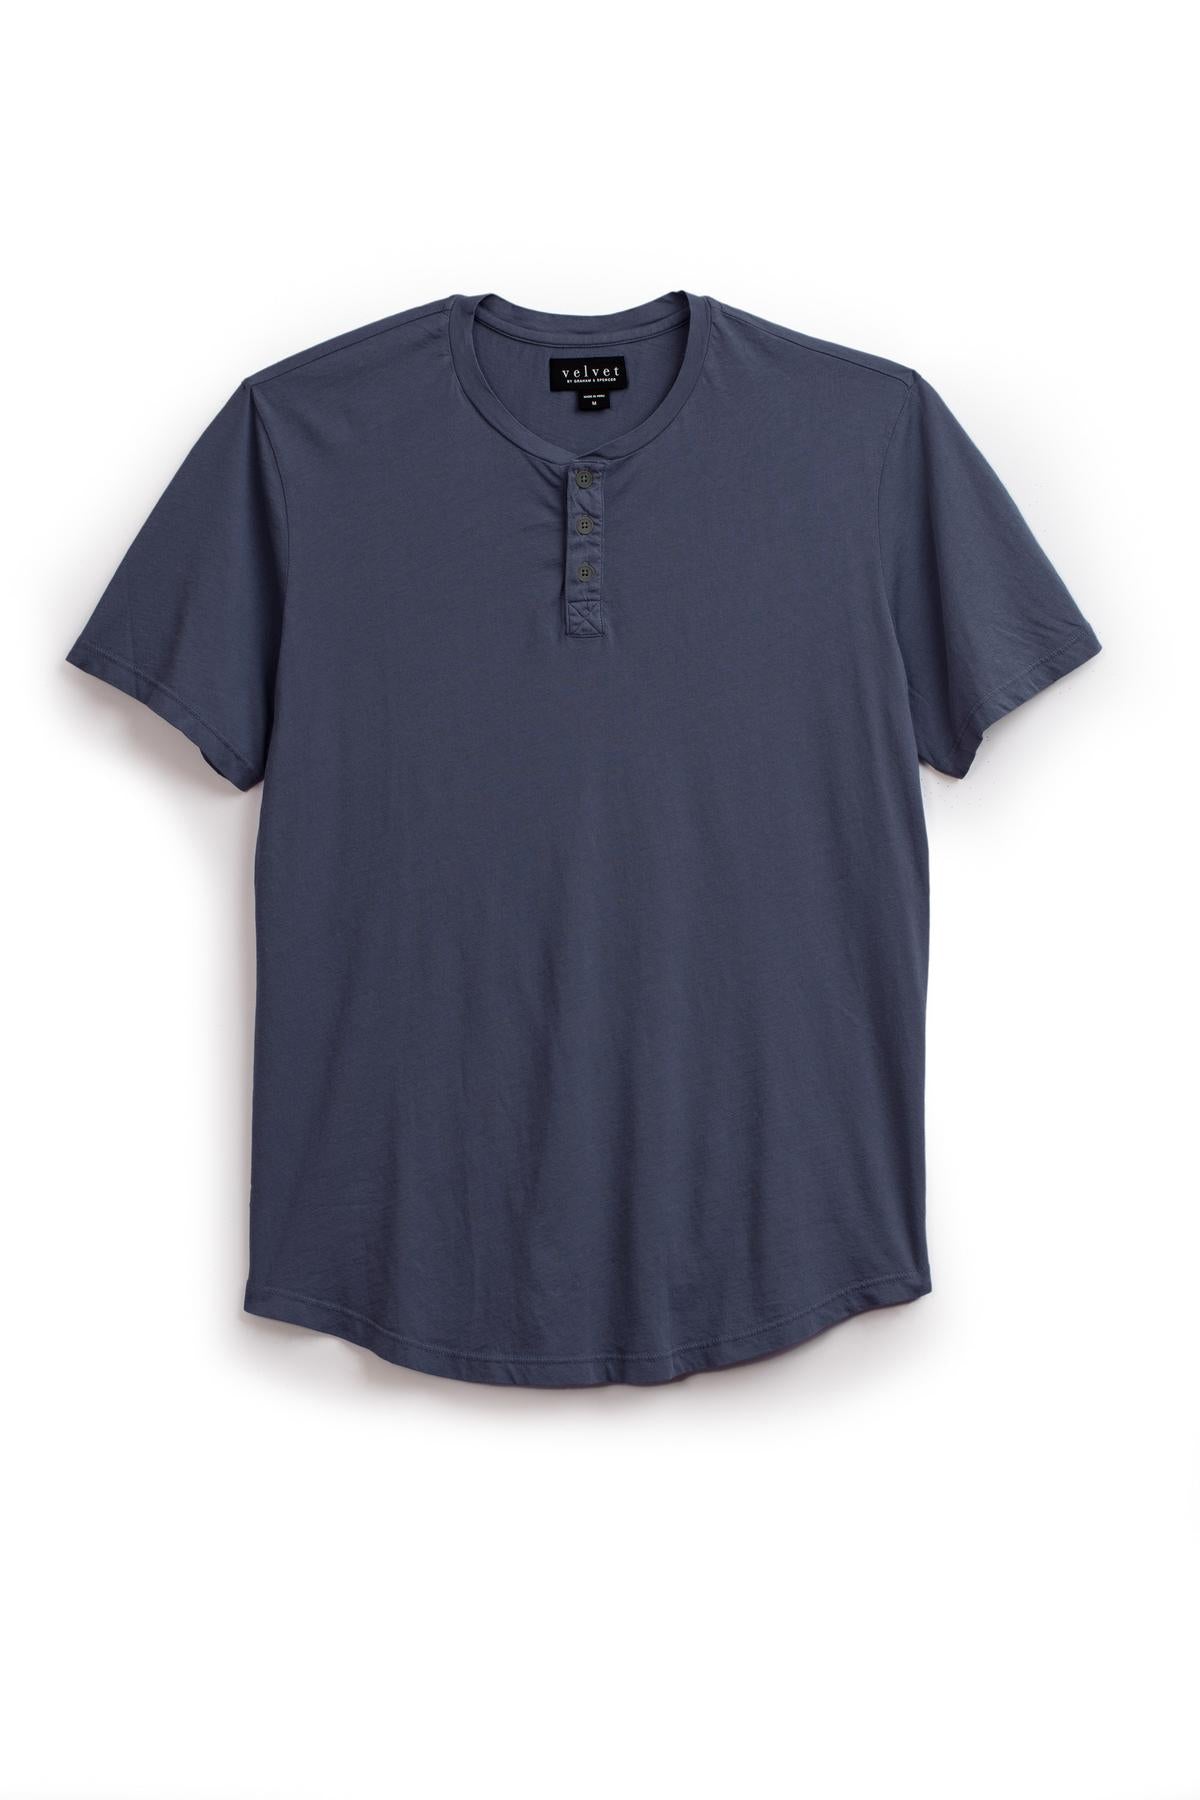 A navy blue FULTON HENLEY tee by Velvet by Graham & Spencer with short sleeves and a button placket, displayed on a plain white background.-36753531175105